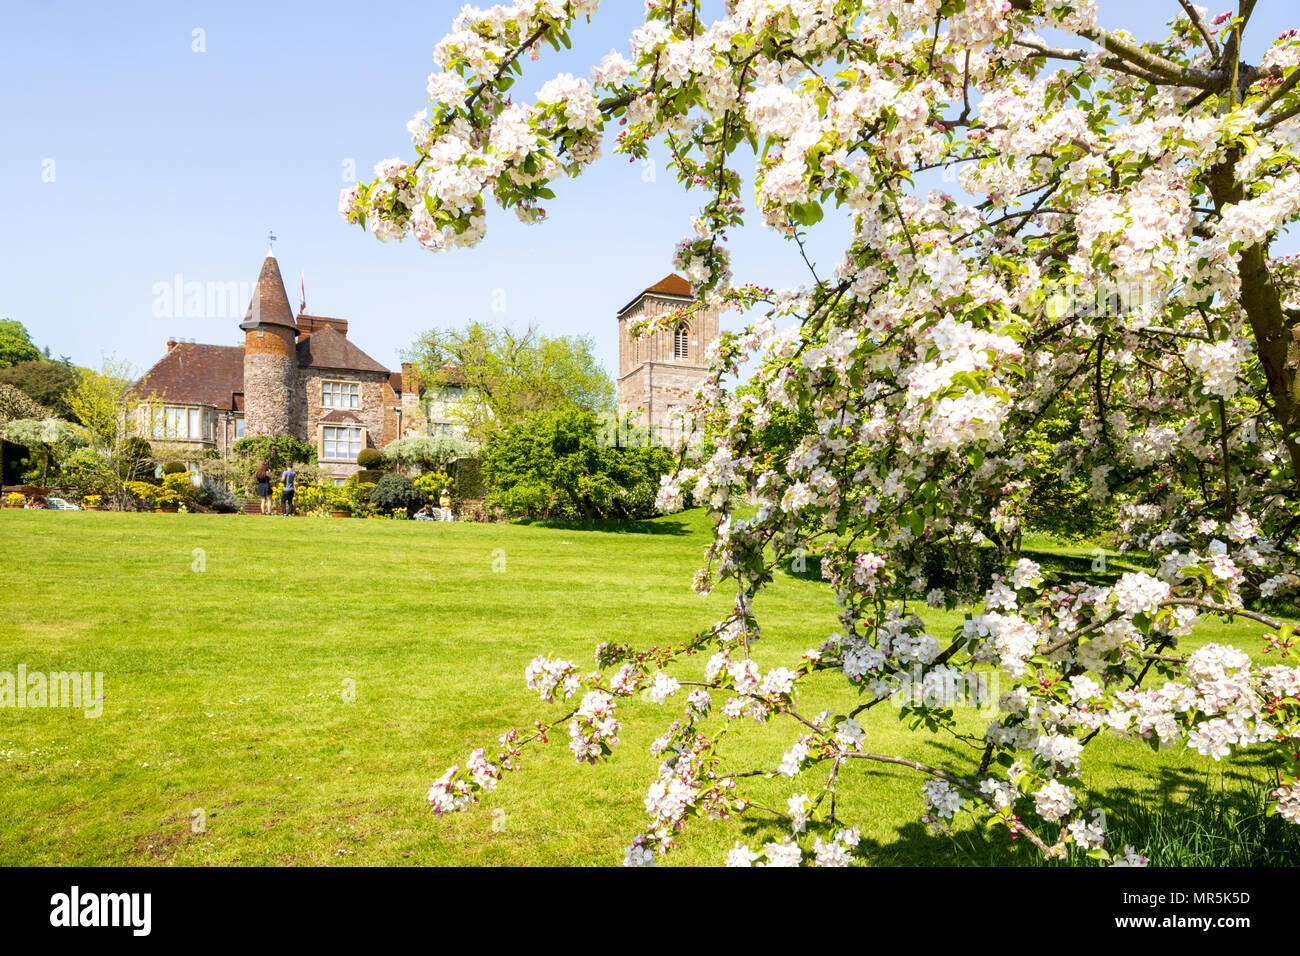 Apple blossom in the gardens of Little Malvern Court a 15th century Priors Hall at Little Malvern, Worcestershire UK Stock Photo